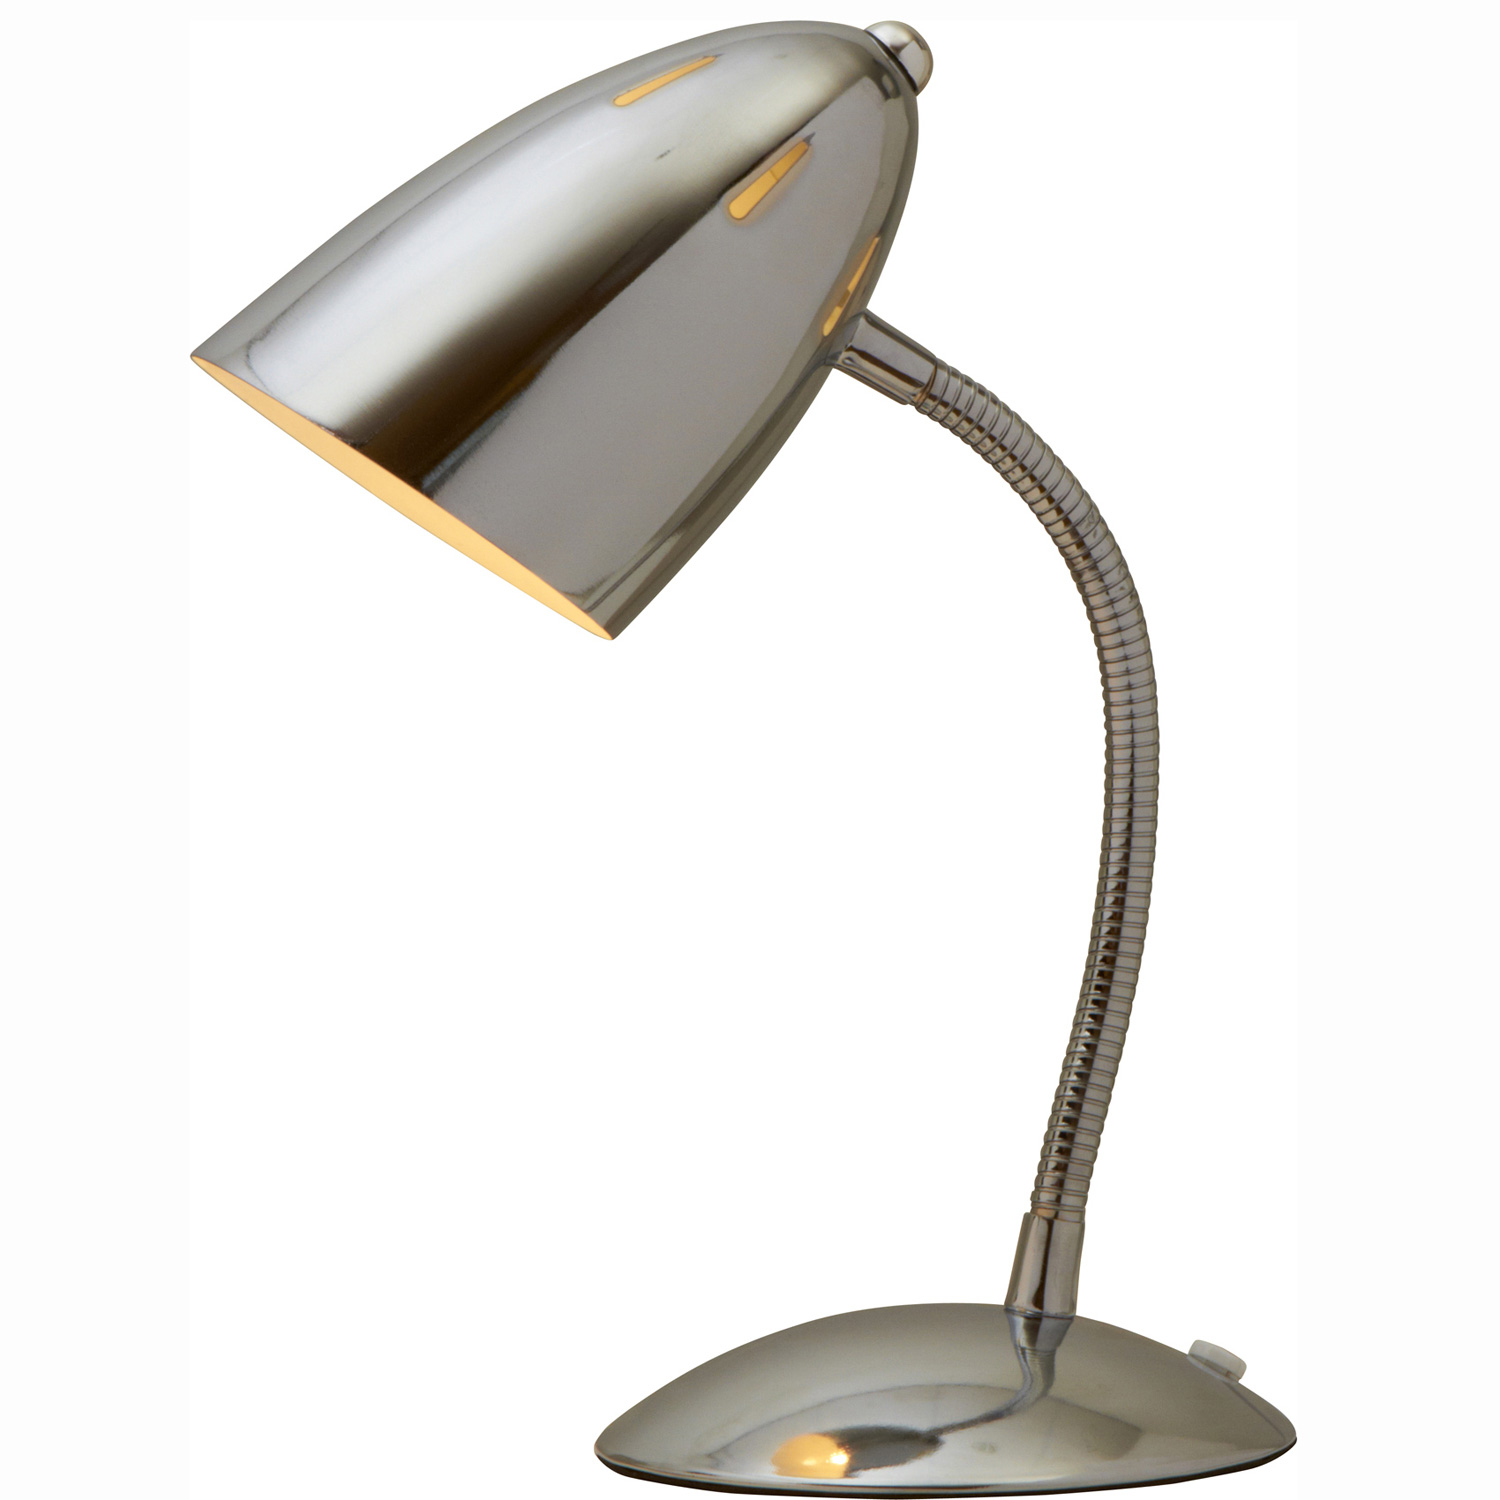 15 Solutions Interior Your Desk Lamps 6607 New Bhs Styling Up At within dimensions 1500 X 1500